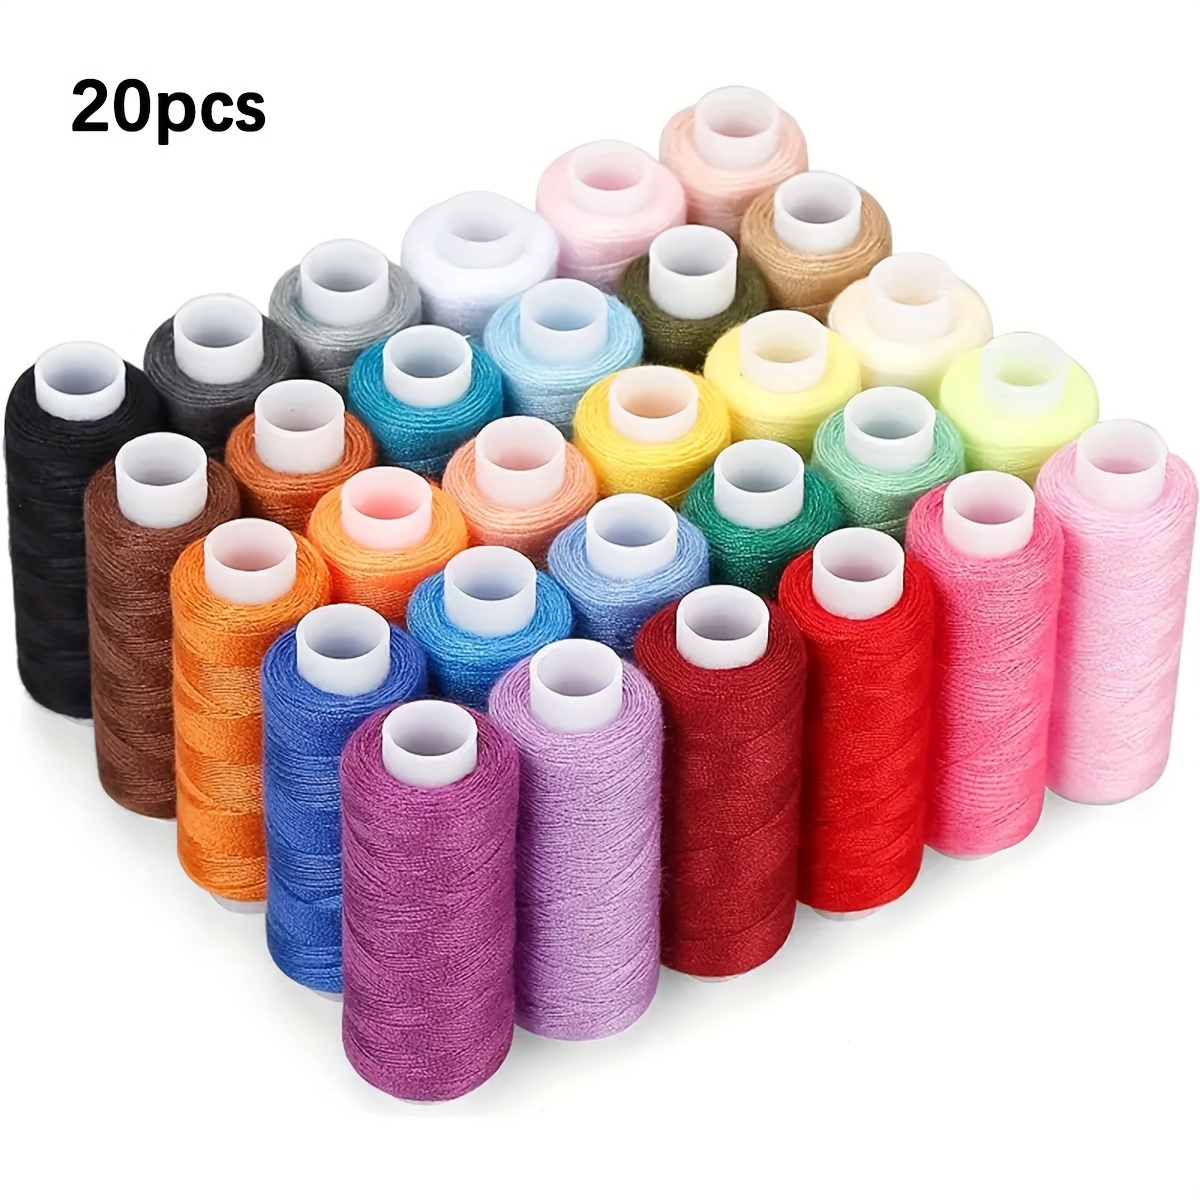 

20pcs Polyester Sewing Thread - 5000 Yards Total, Assorted Colors (white/red/blue/black), Ideal For Diy Crafts, Hand & Machine Stitching, Repairing Clothes And Socks Sewing Supplies Fabric For Sewing